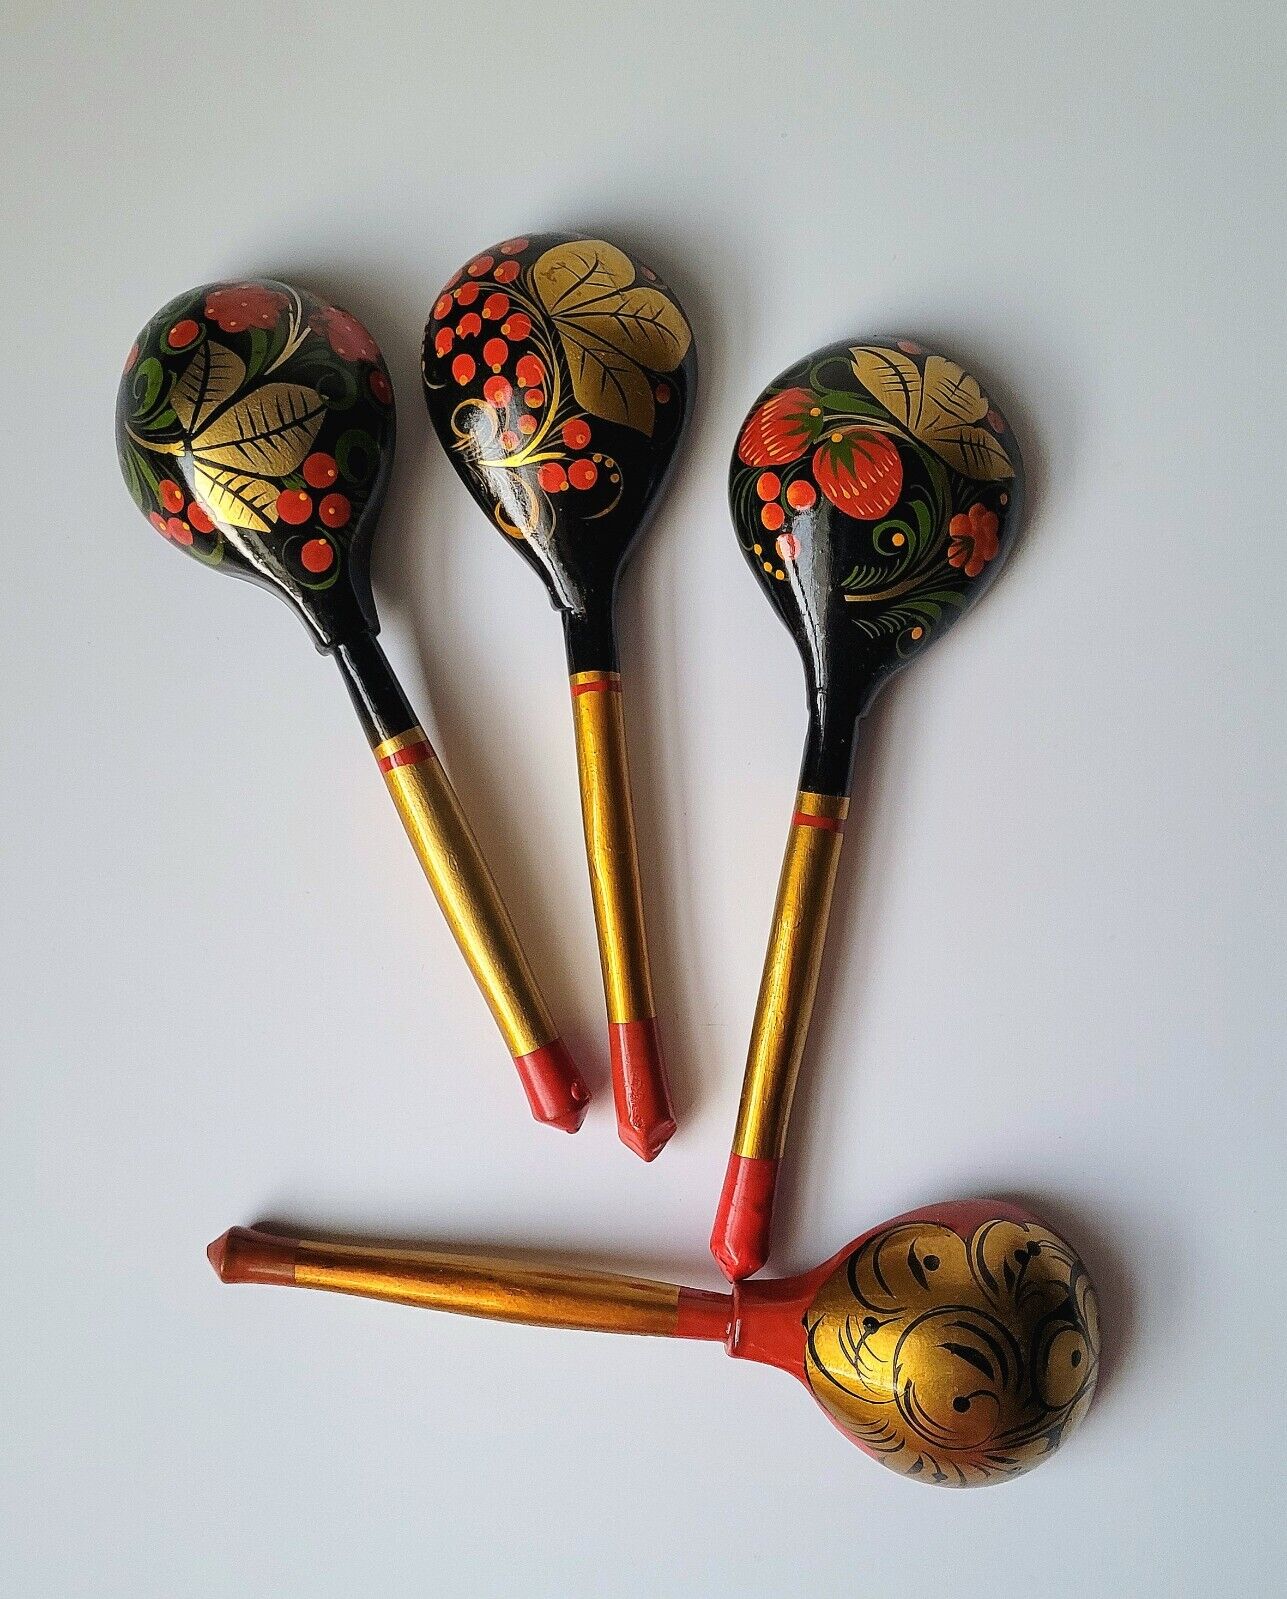 4 Vtg Russian Folk Art Wooden Khokhloma Spoons HandPainted Old Lacquer Technique